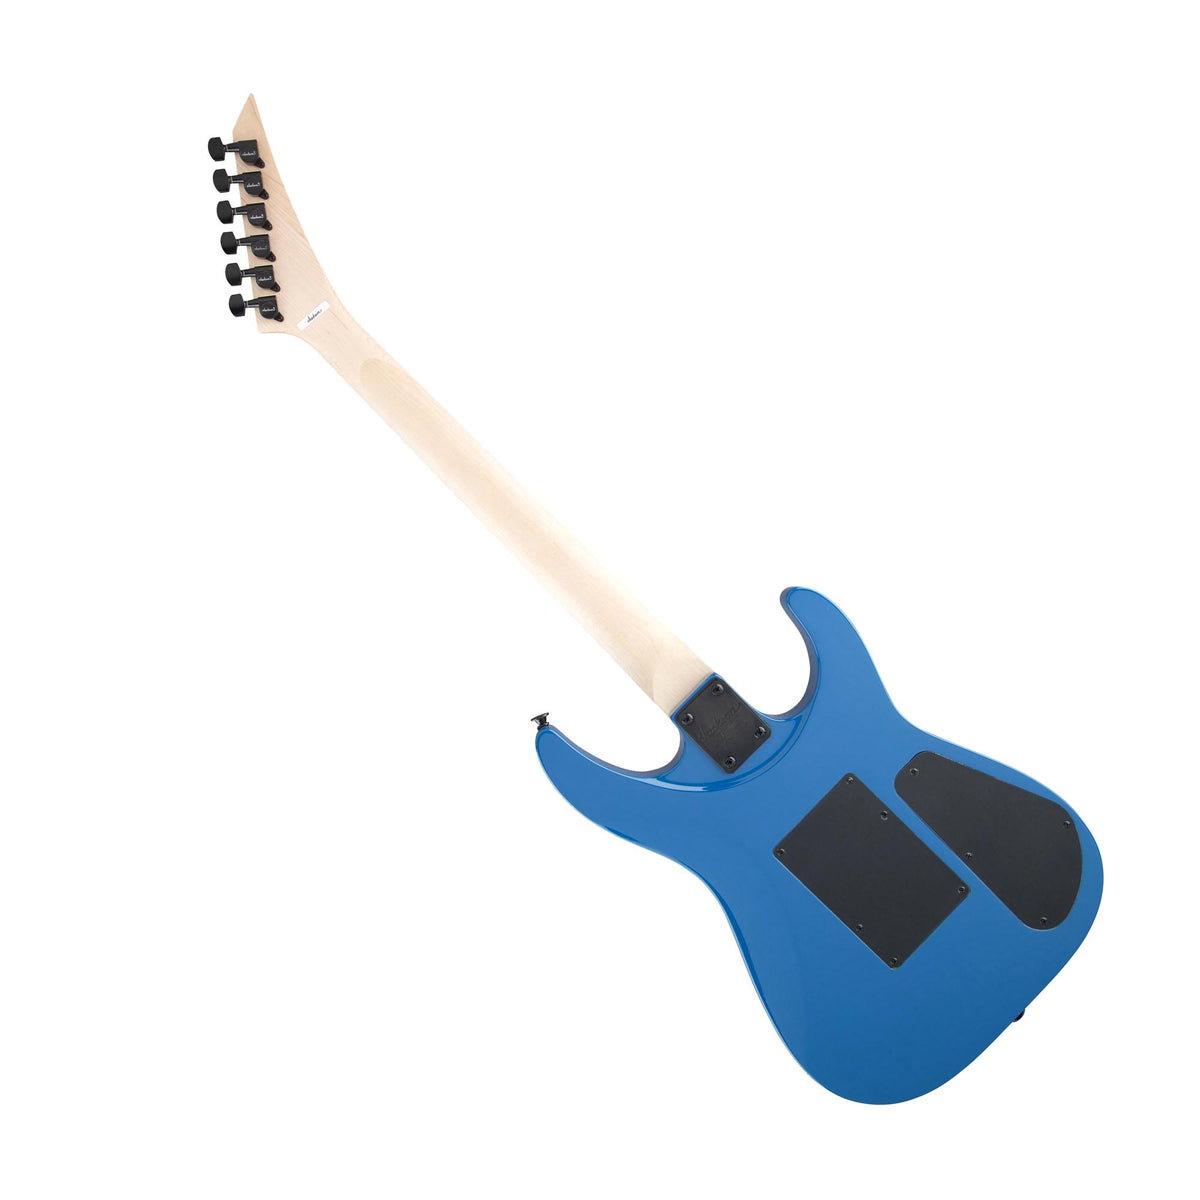 Series　Bright　Jackson　DKA　pedals　JS　any　Arch　Blue　JS32L　Left-Handed,　for　Dinky　genre　Top　guitar